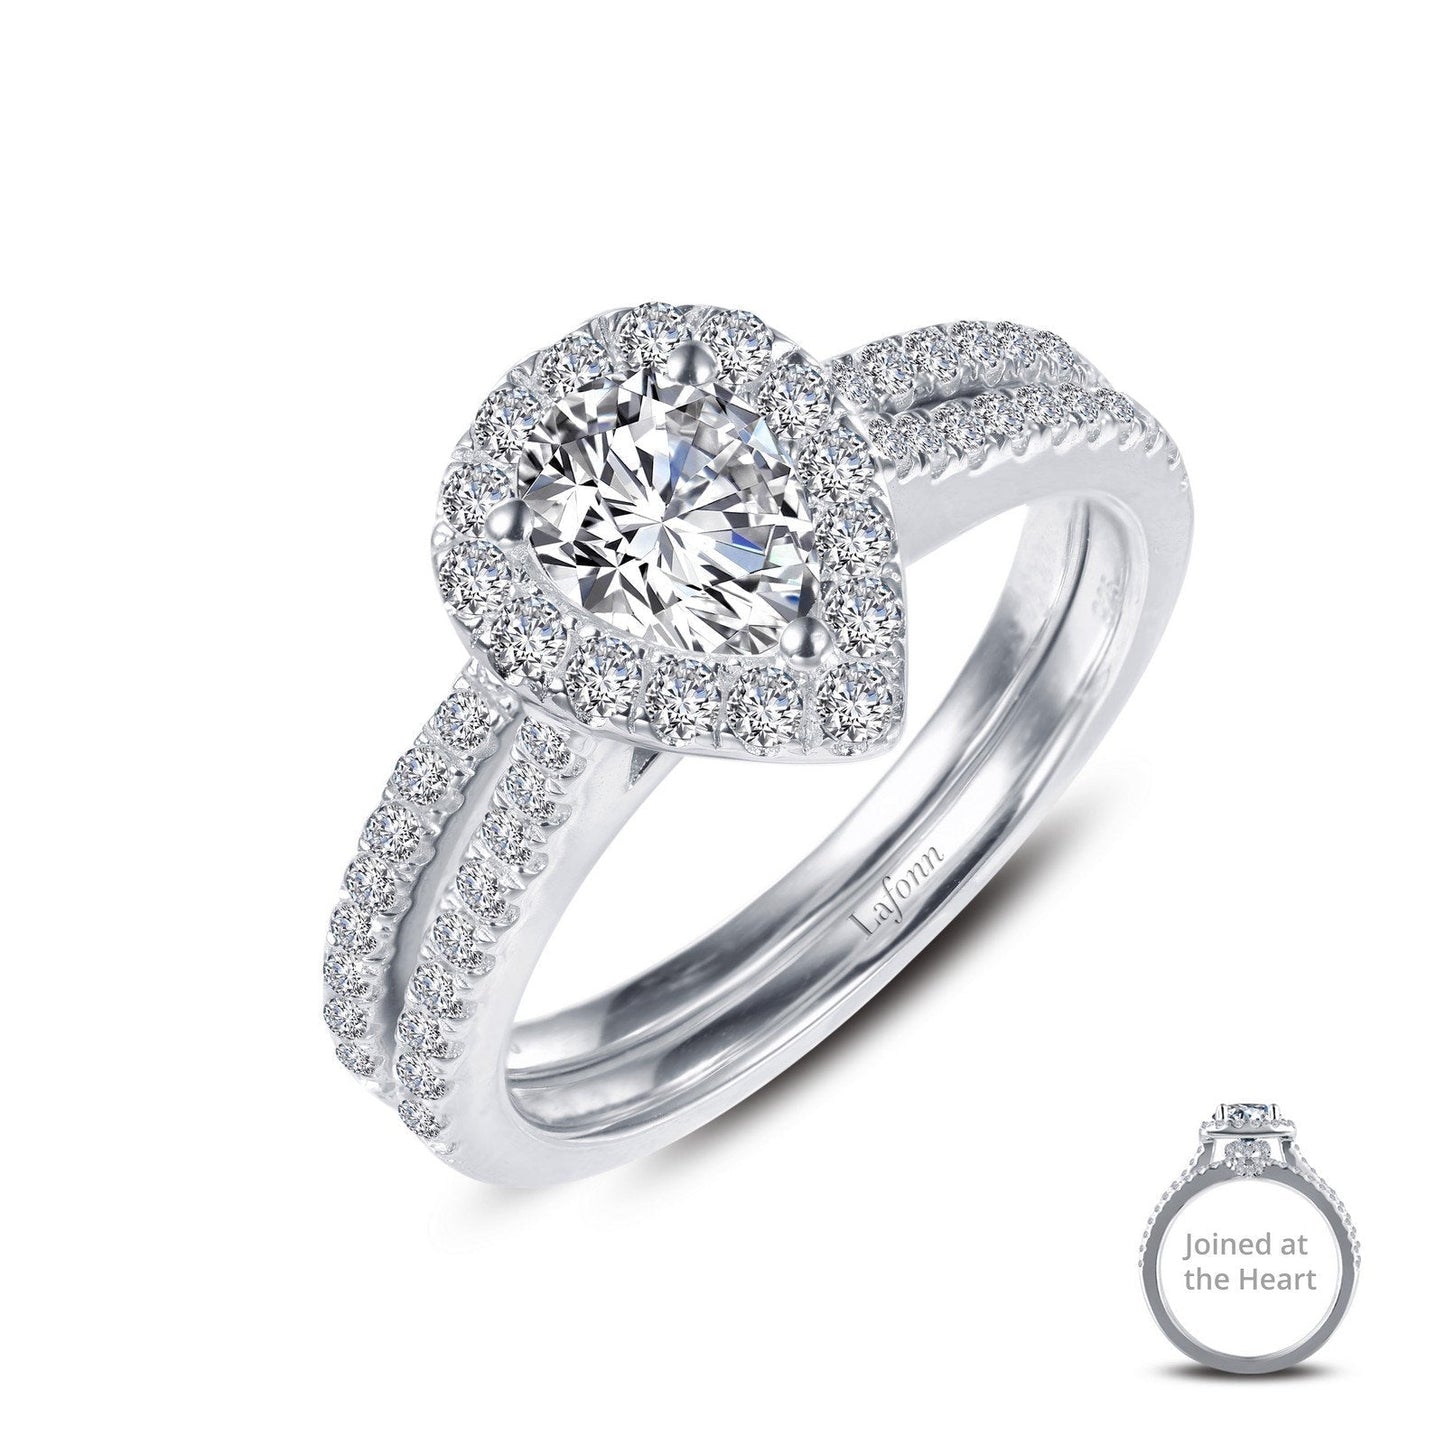 LaFonn Platinum Simulated Diamond Size: 7X5mm Pear, Approx. 0.71 CTW RINGS Joined-At-The-Heart Wedding Set